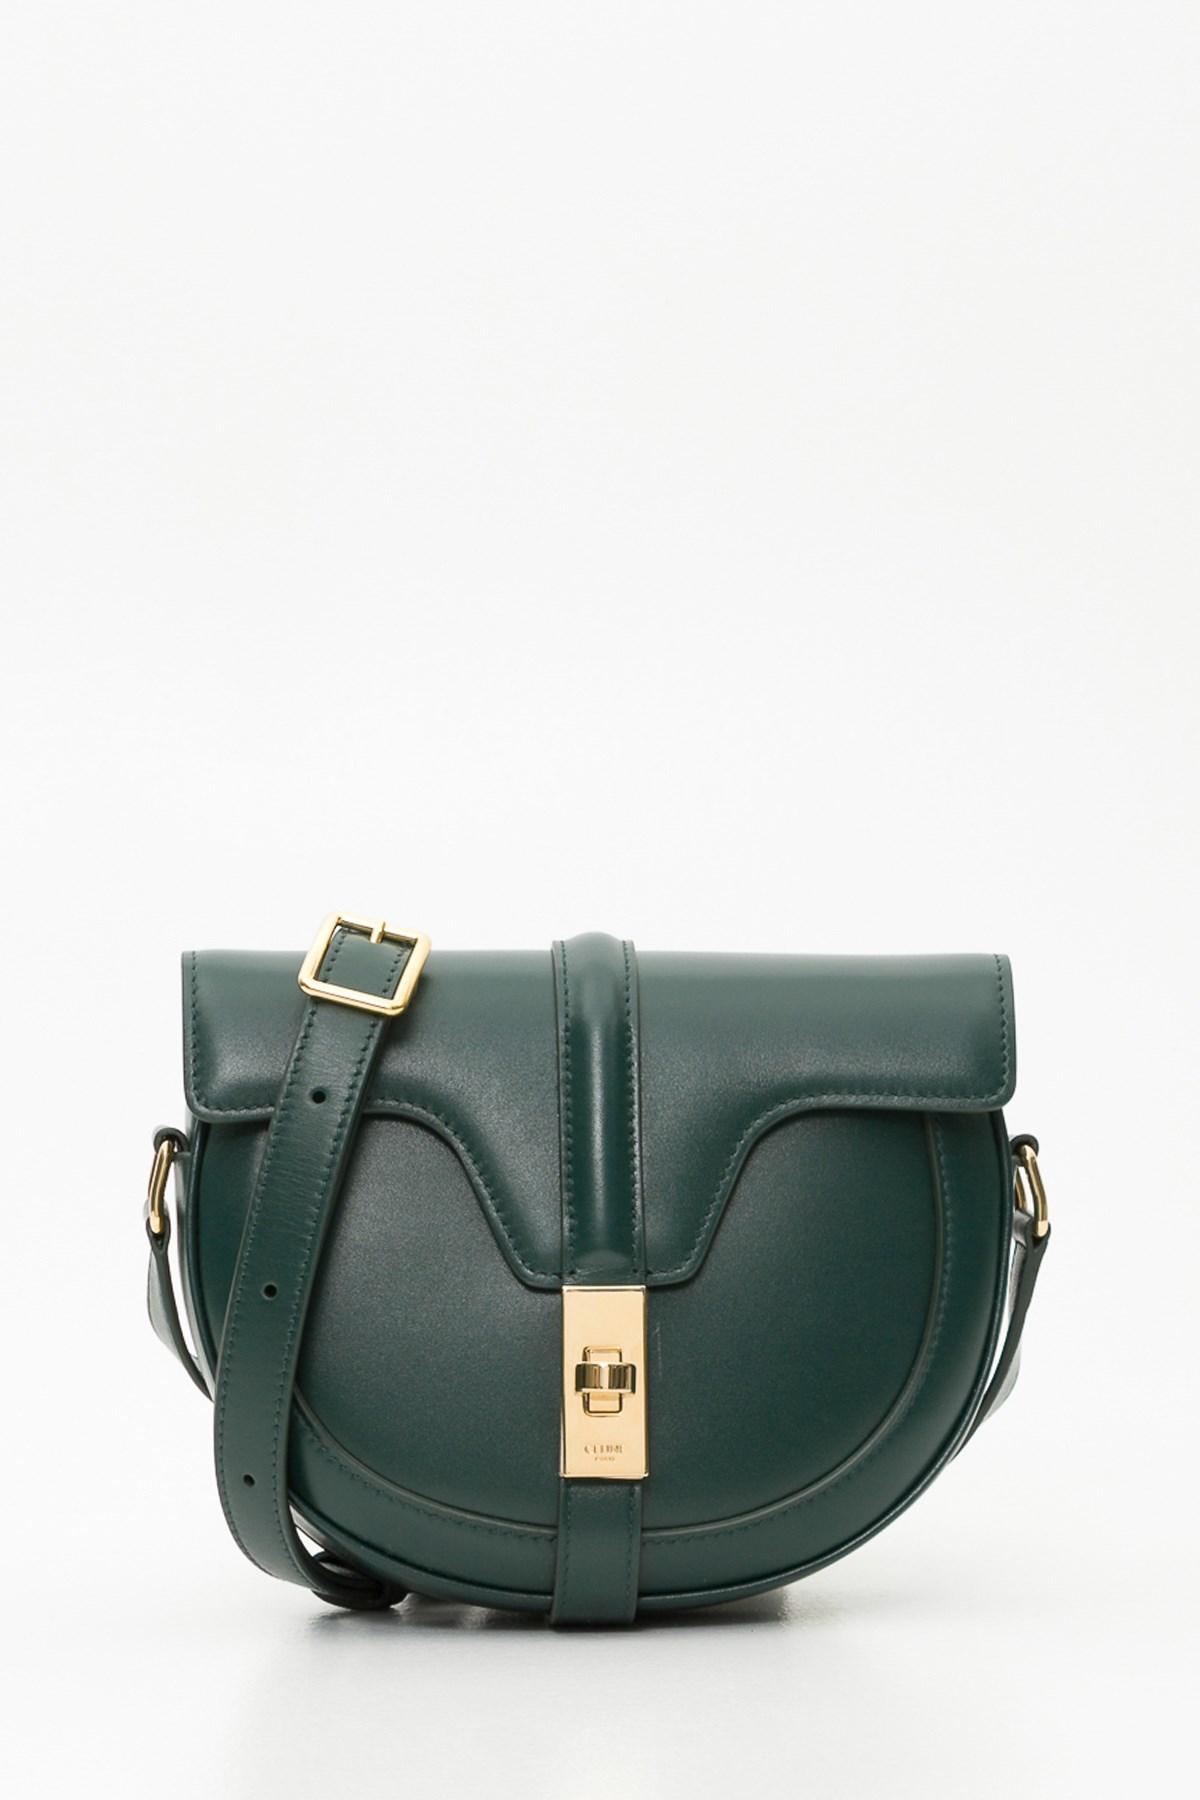 Celine Leather Small Besace 16 Bag in Green - Lyst